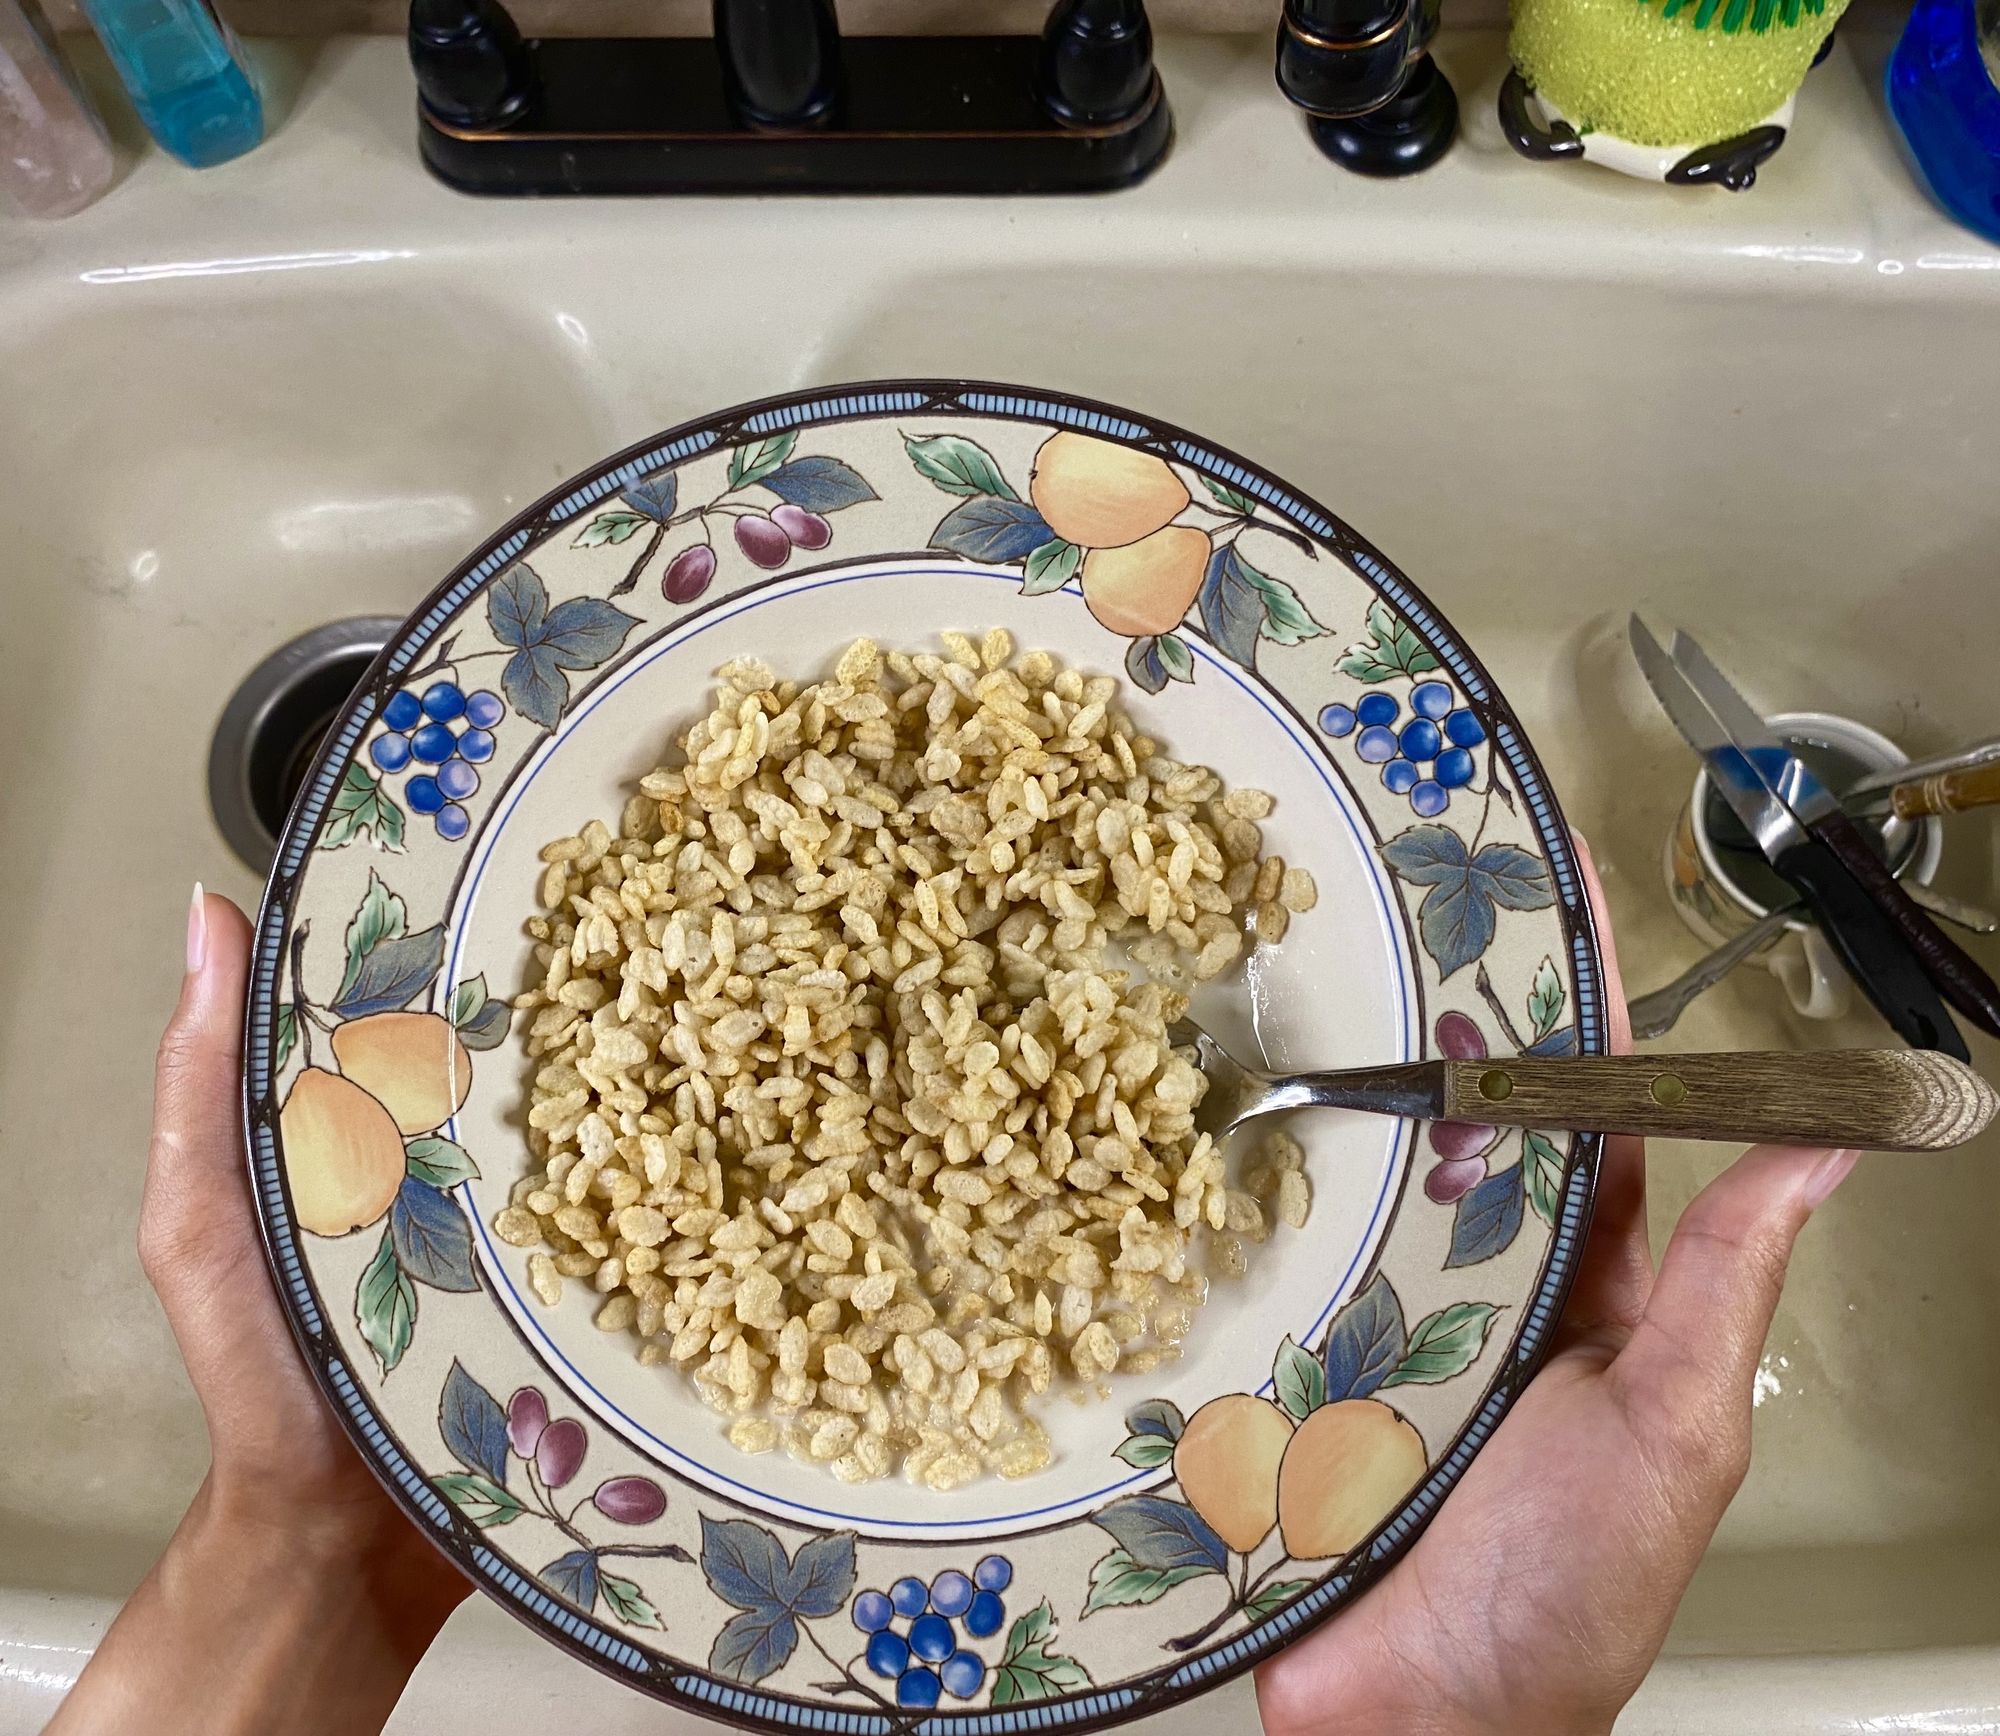 A bowl of rice cereal being held over a kitchen sink with some utensils in the sink. 